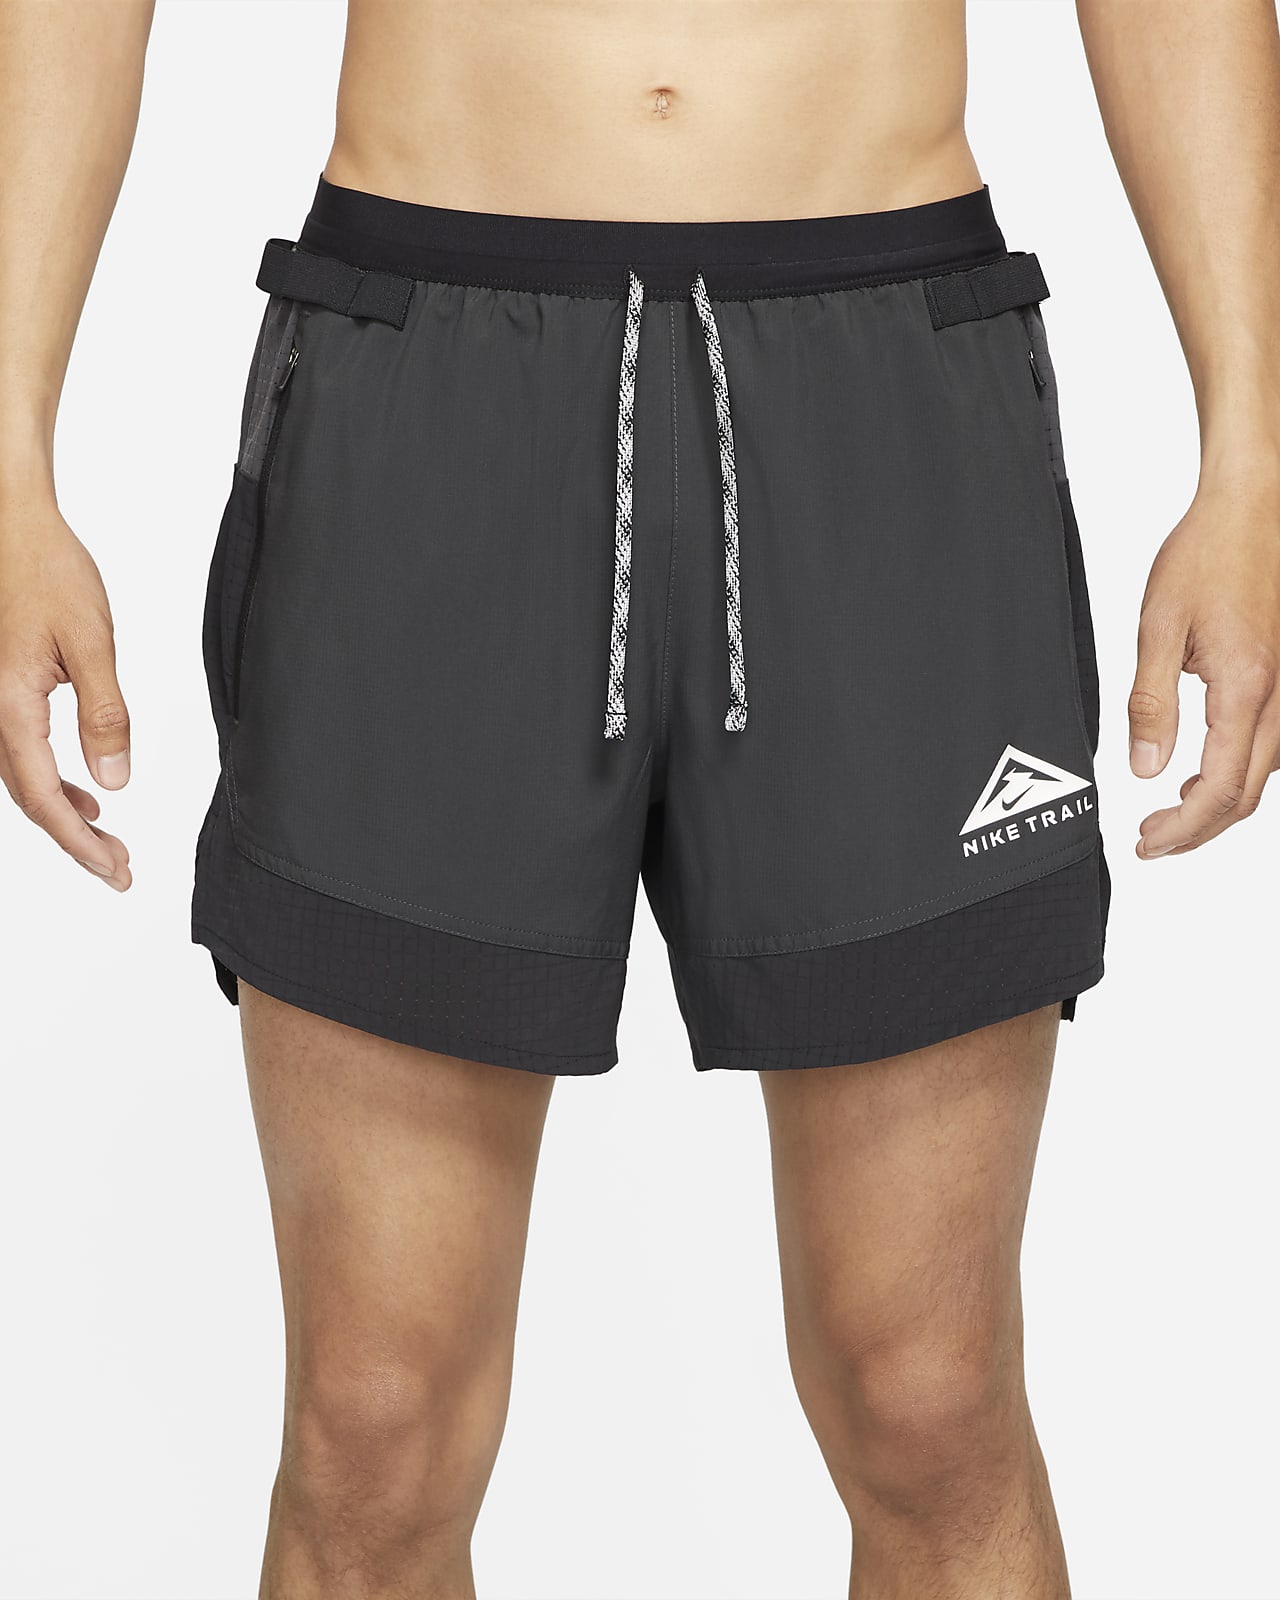 nike dri fit shorts with back zip pocket